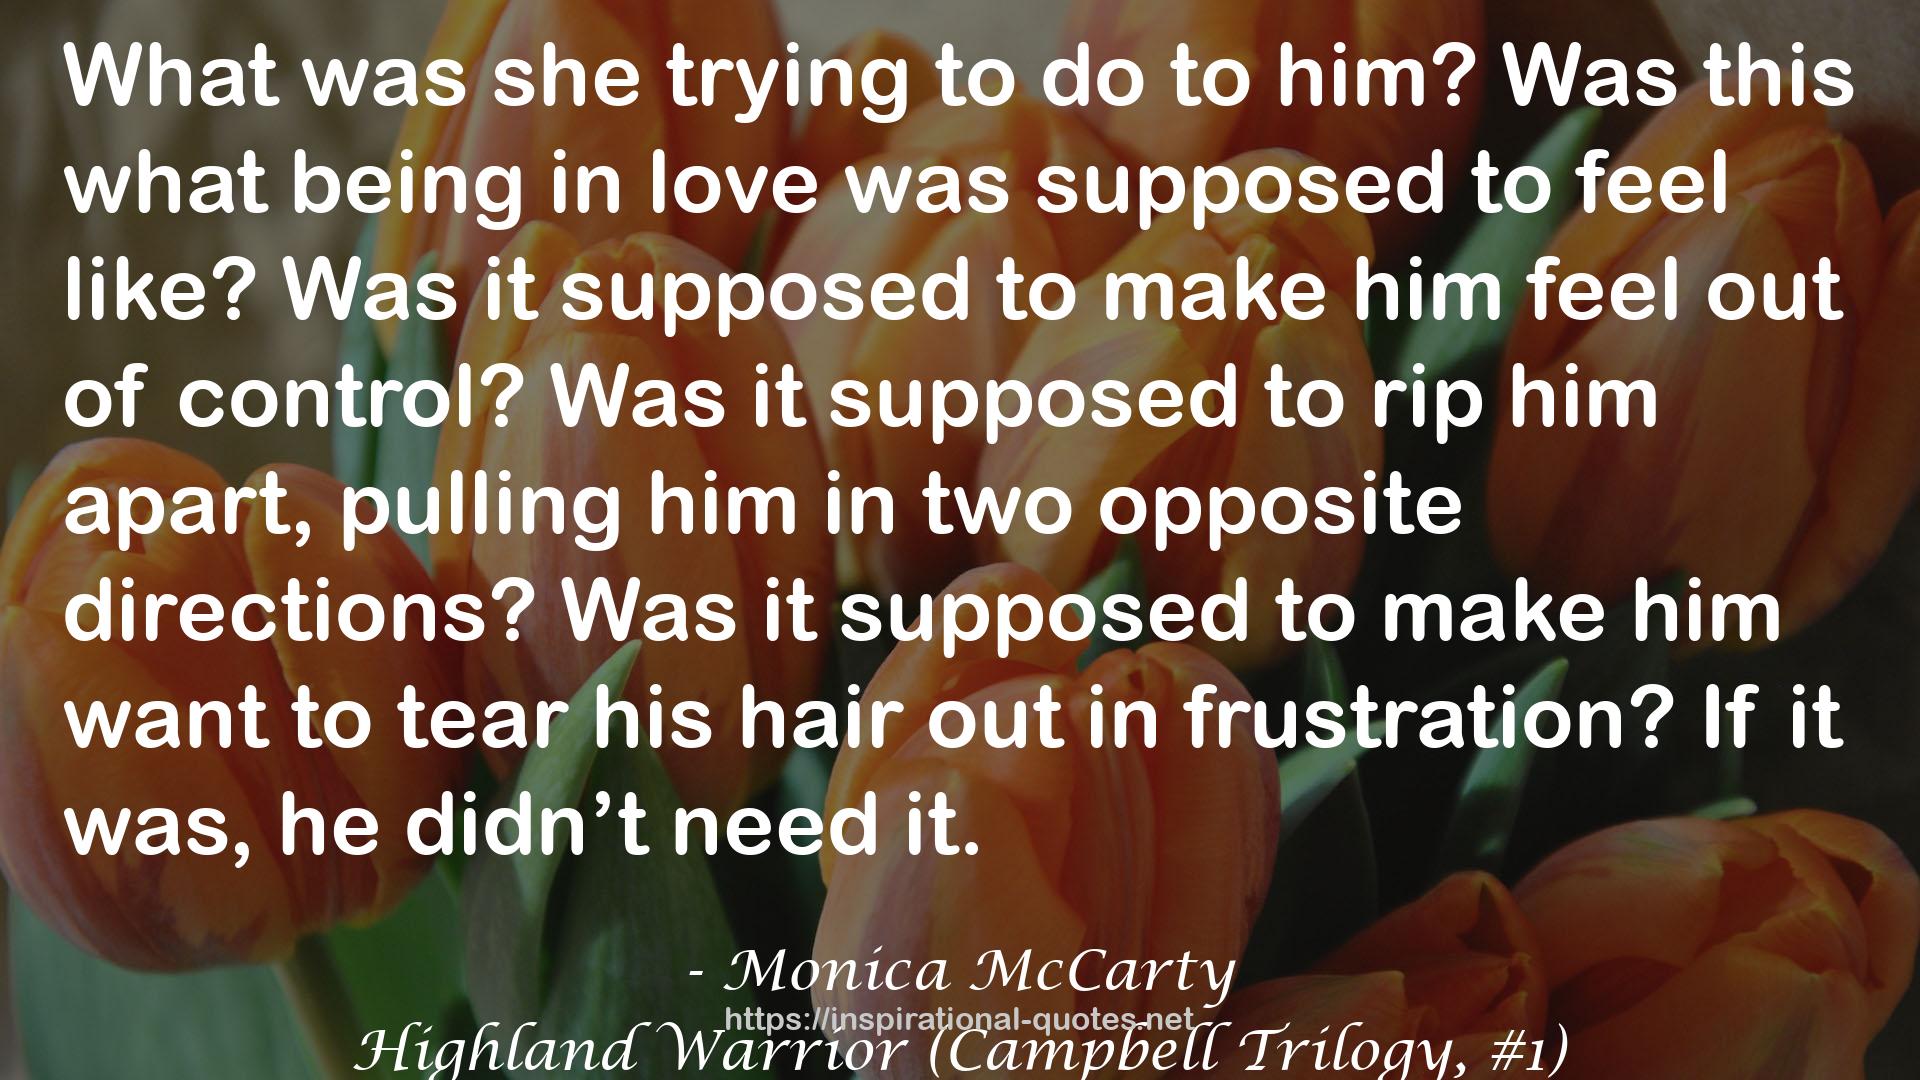 Highland Warrior (Campbell Trilogy, #1) QUOTES